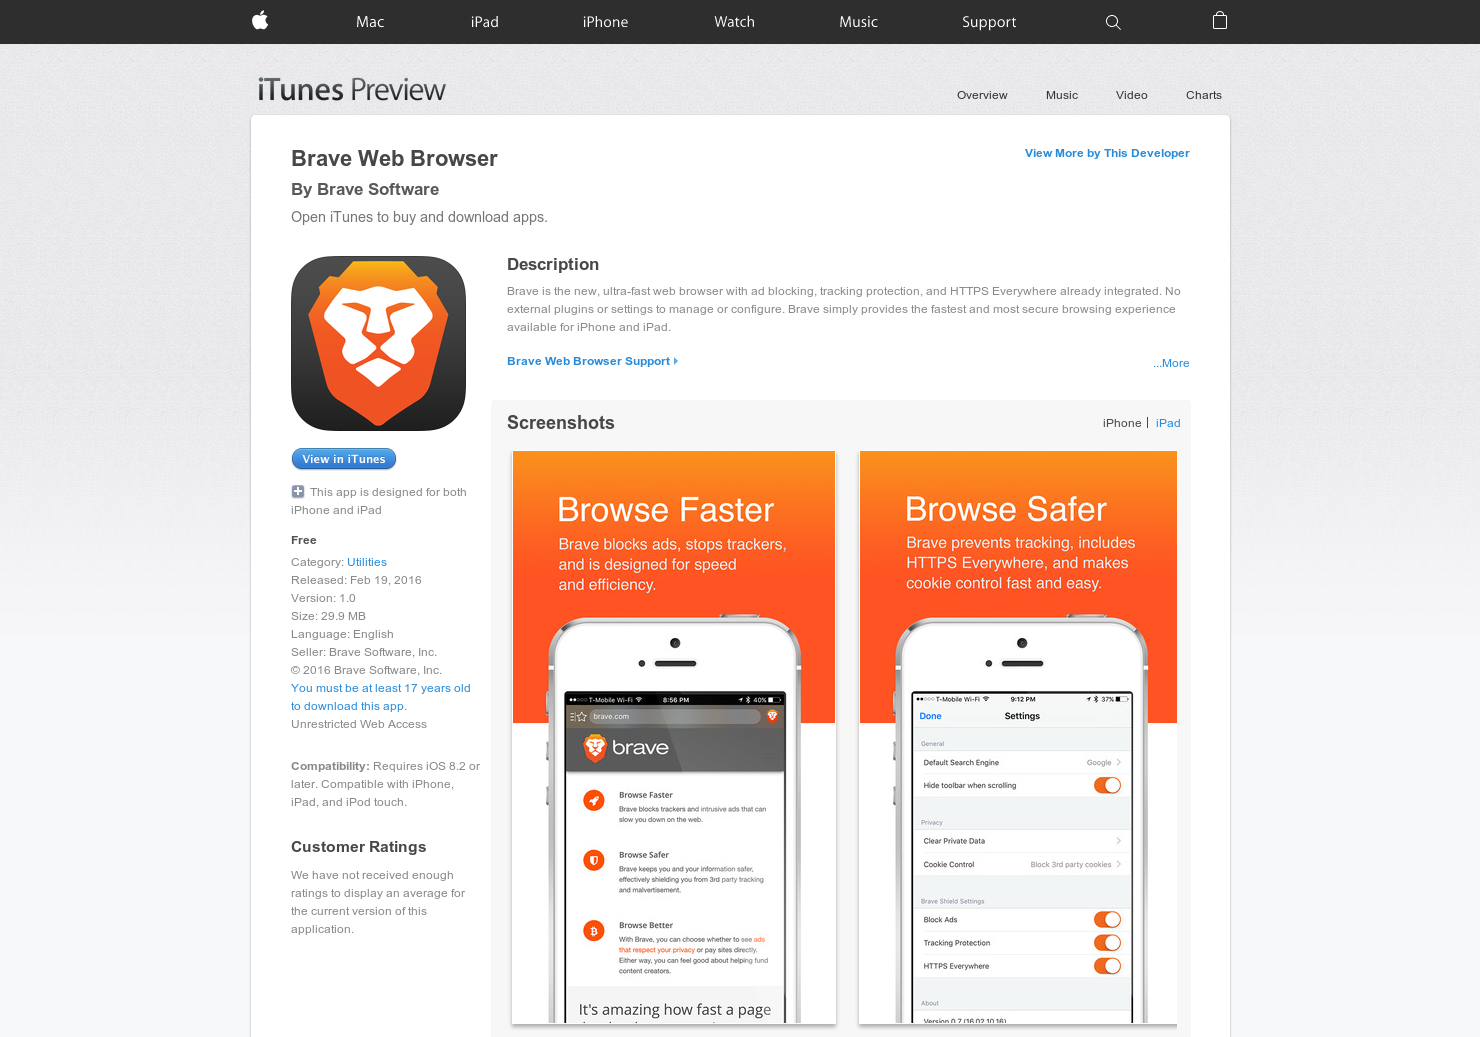 download the new version for ios brave 1.52.126